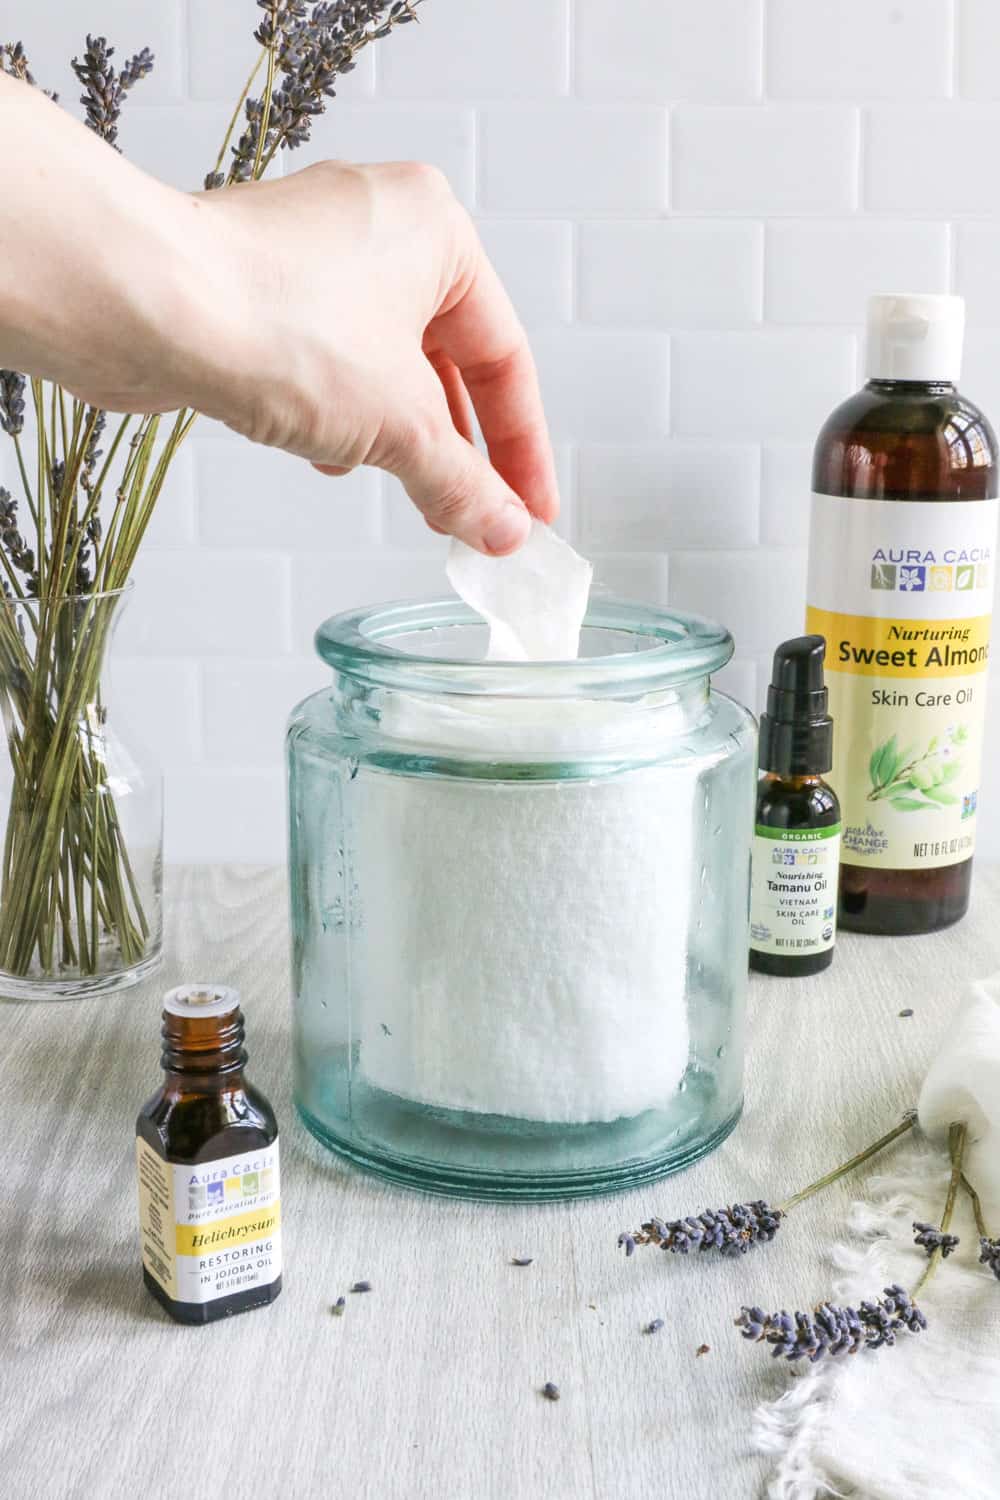 How to Make Your Own Essential Oil Towelettes